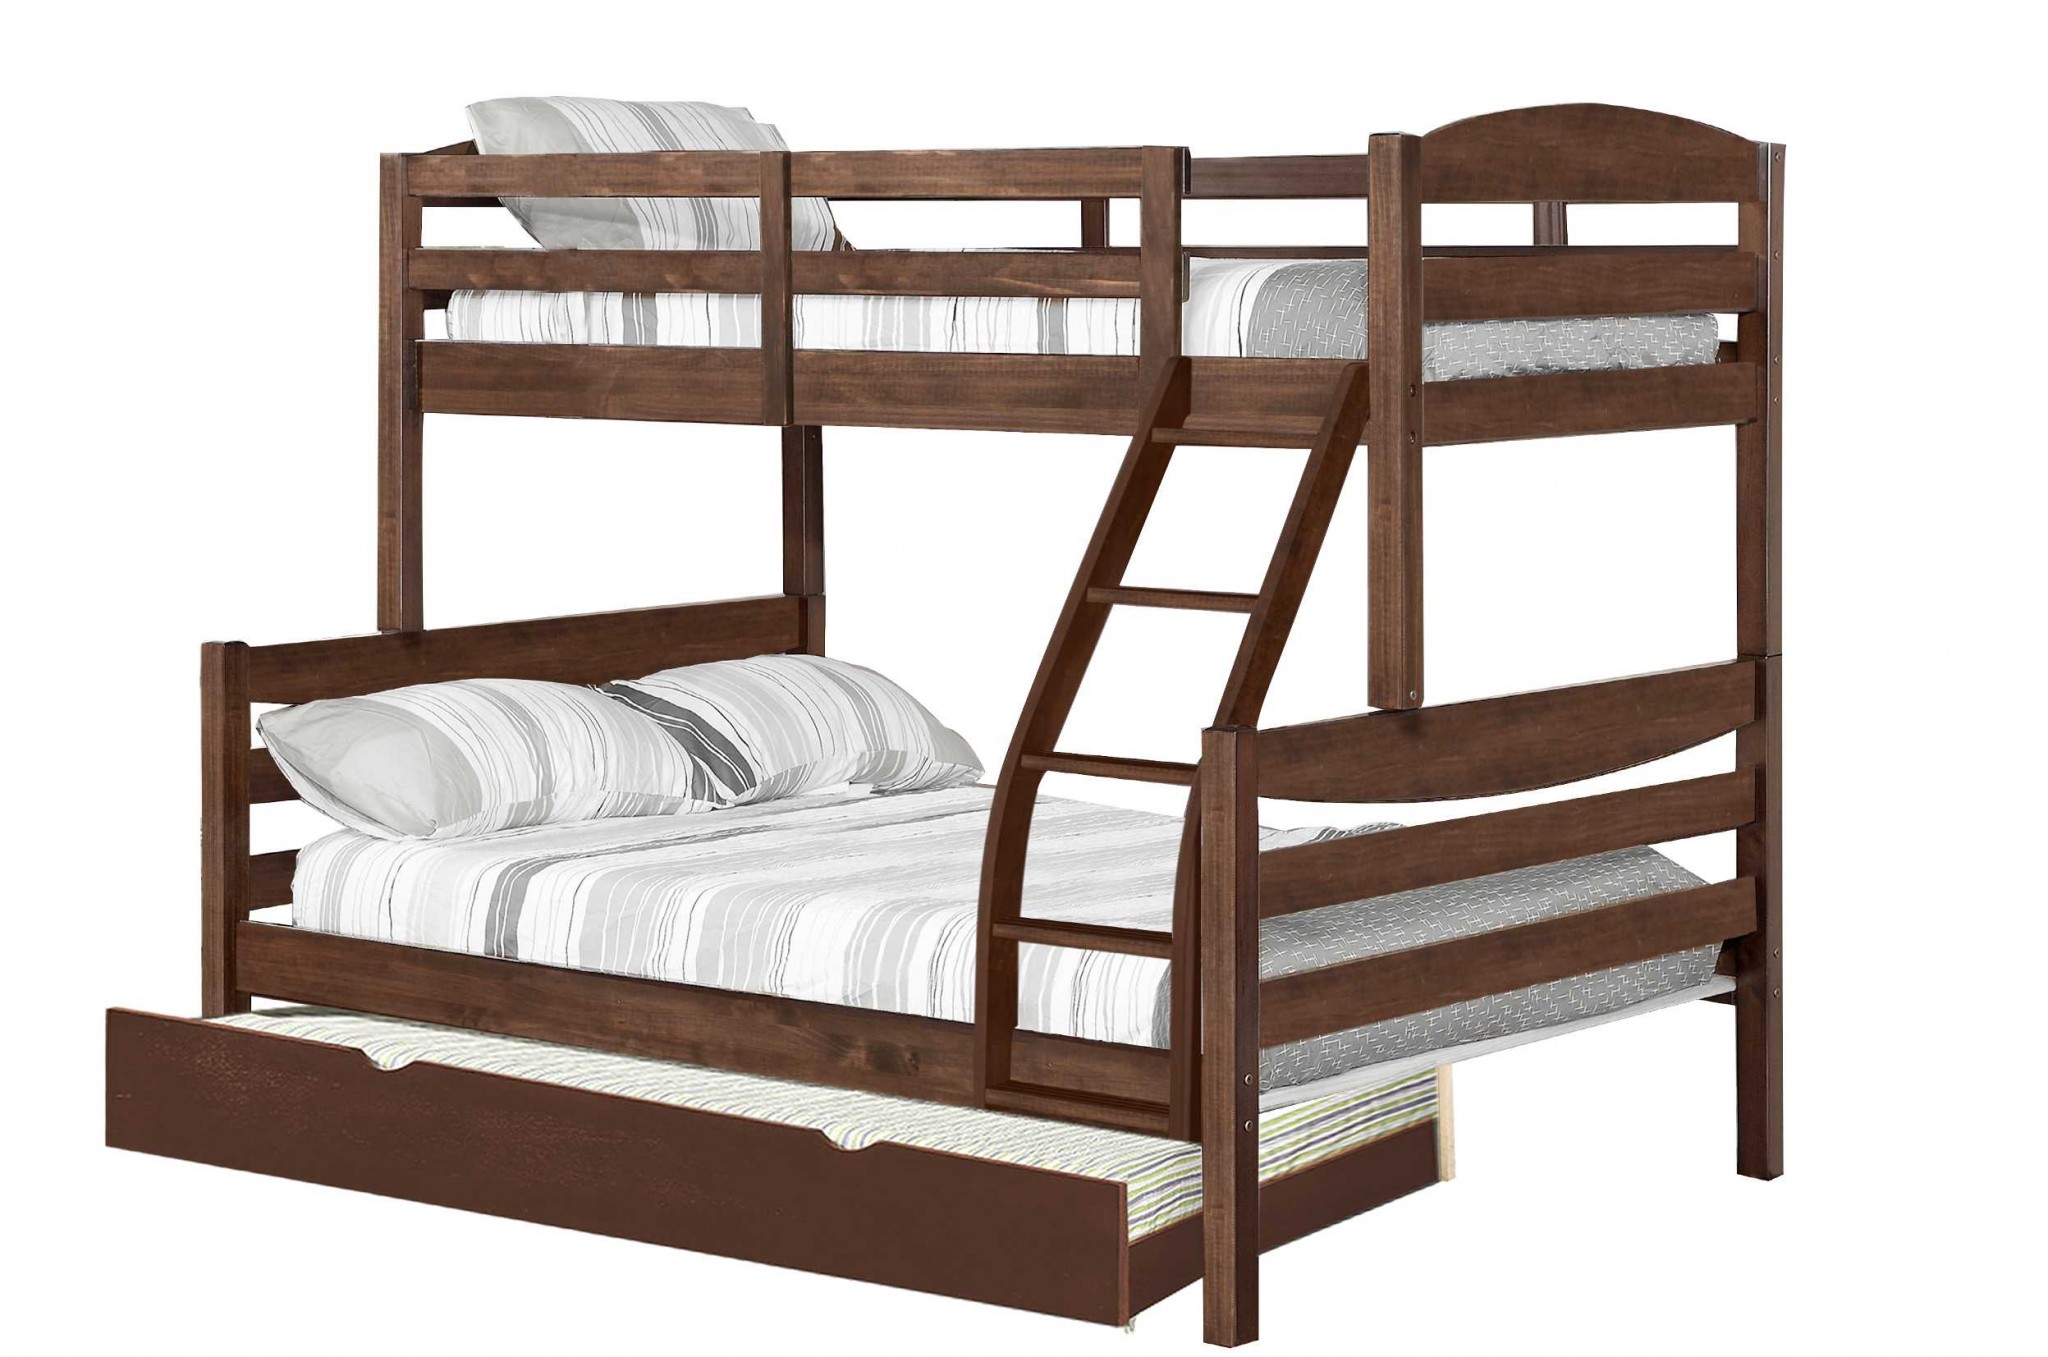 81" X 42.5-57.25" X 66.75" Brown Solid and Manufactured Wood Twin or Full Bunk Bed with Matching Trundle